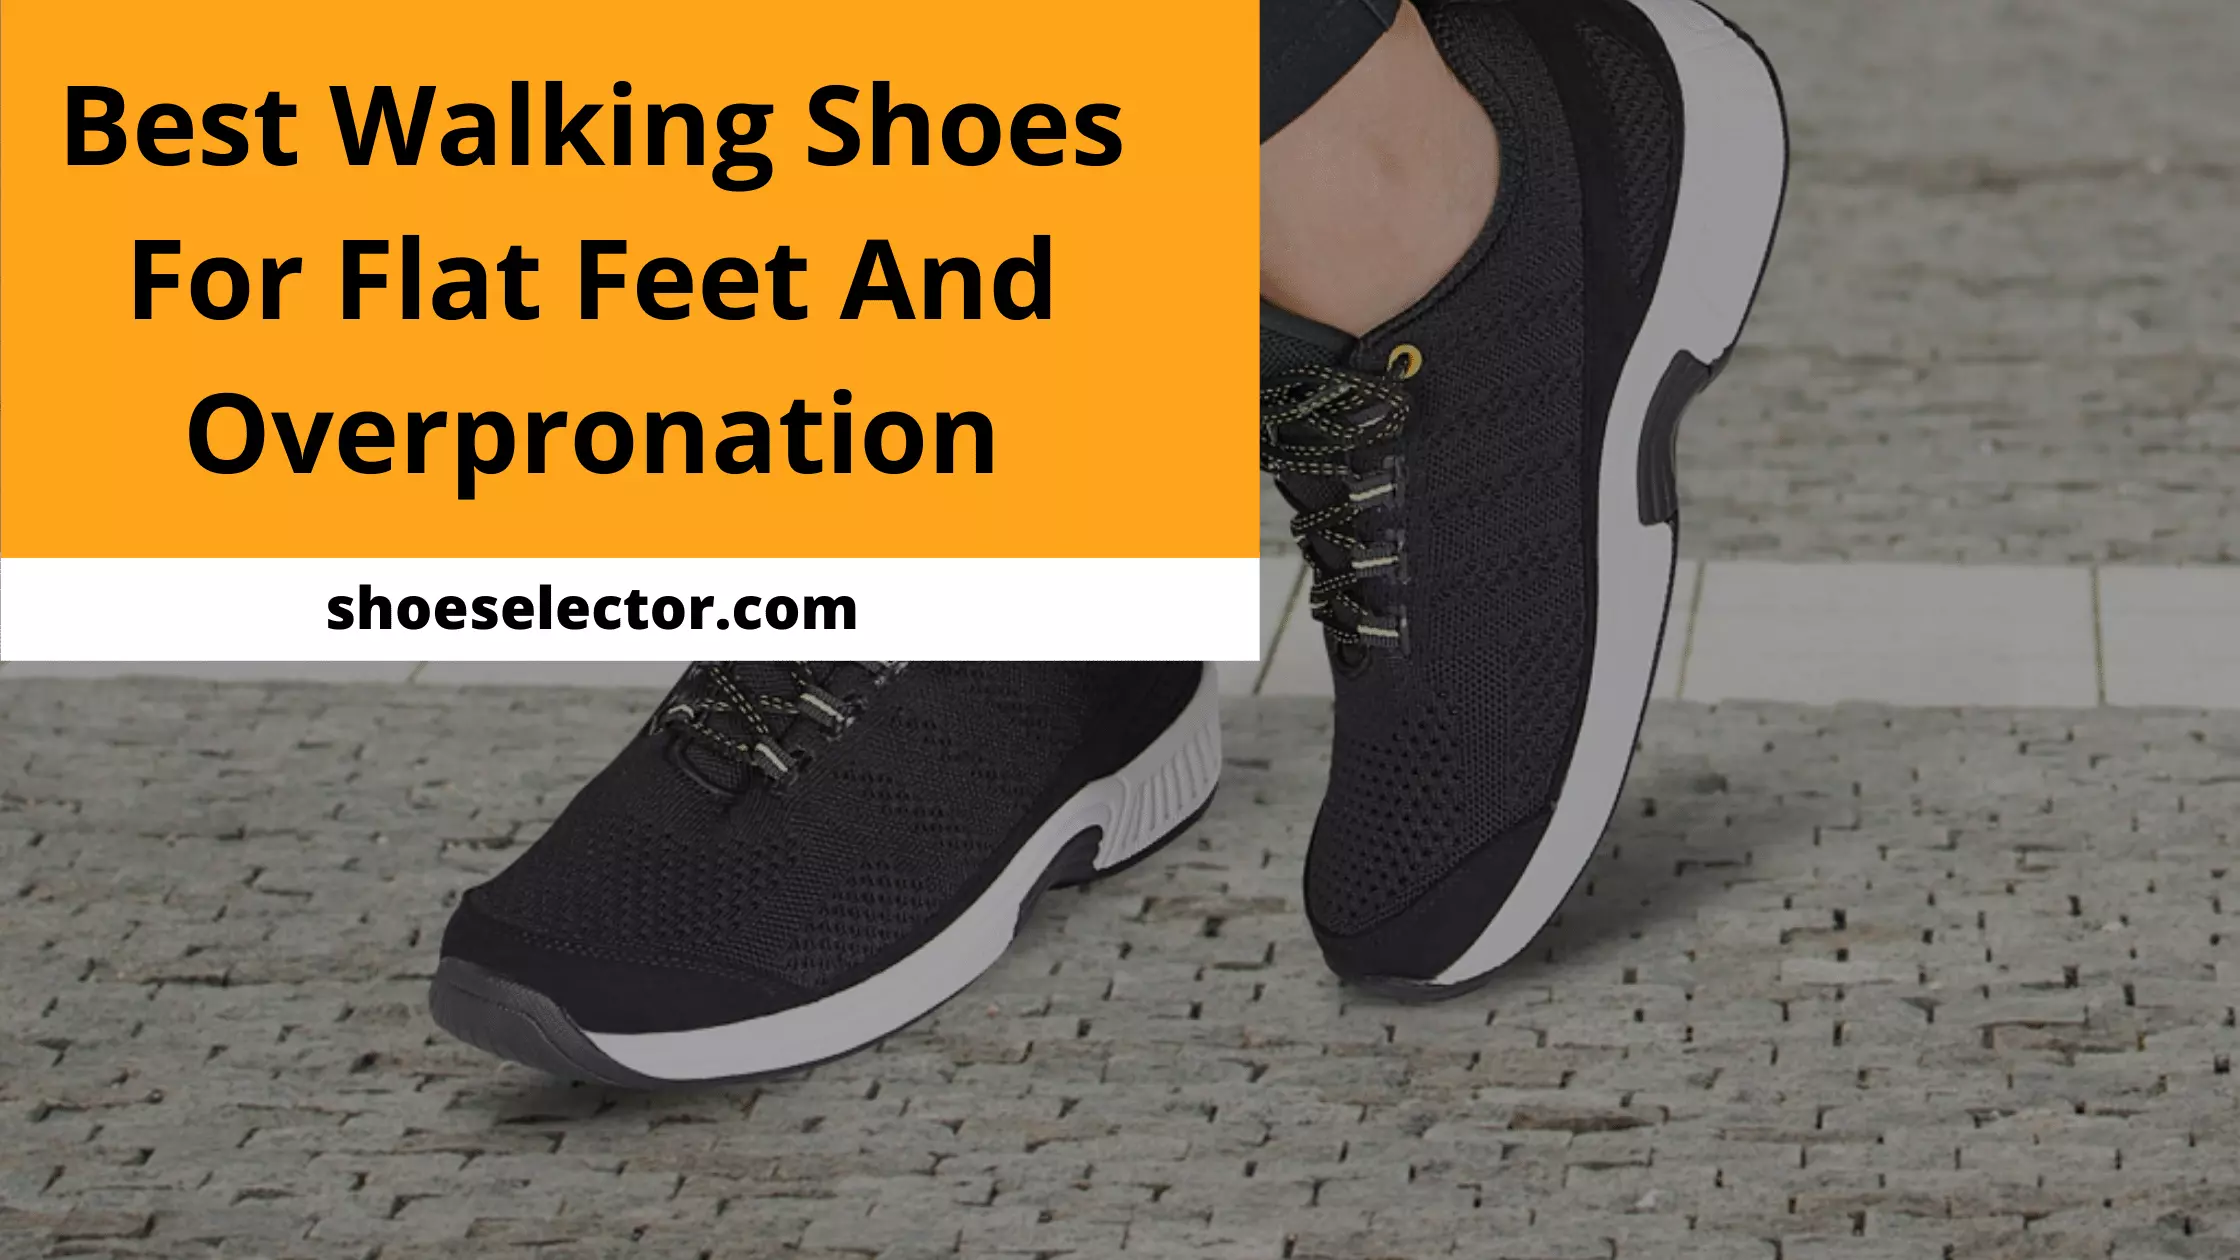 Best Walking Shoes For Flat Feet And Overpronation [REVEALED Top Picks in 2022]